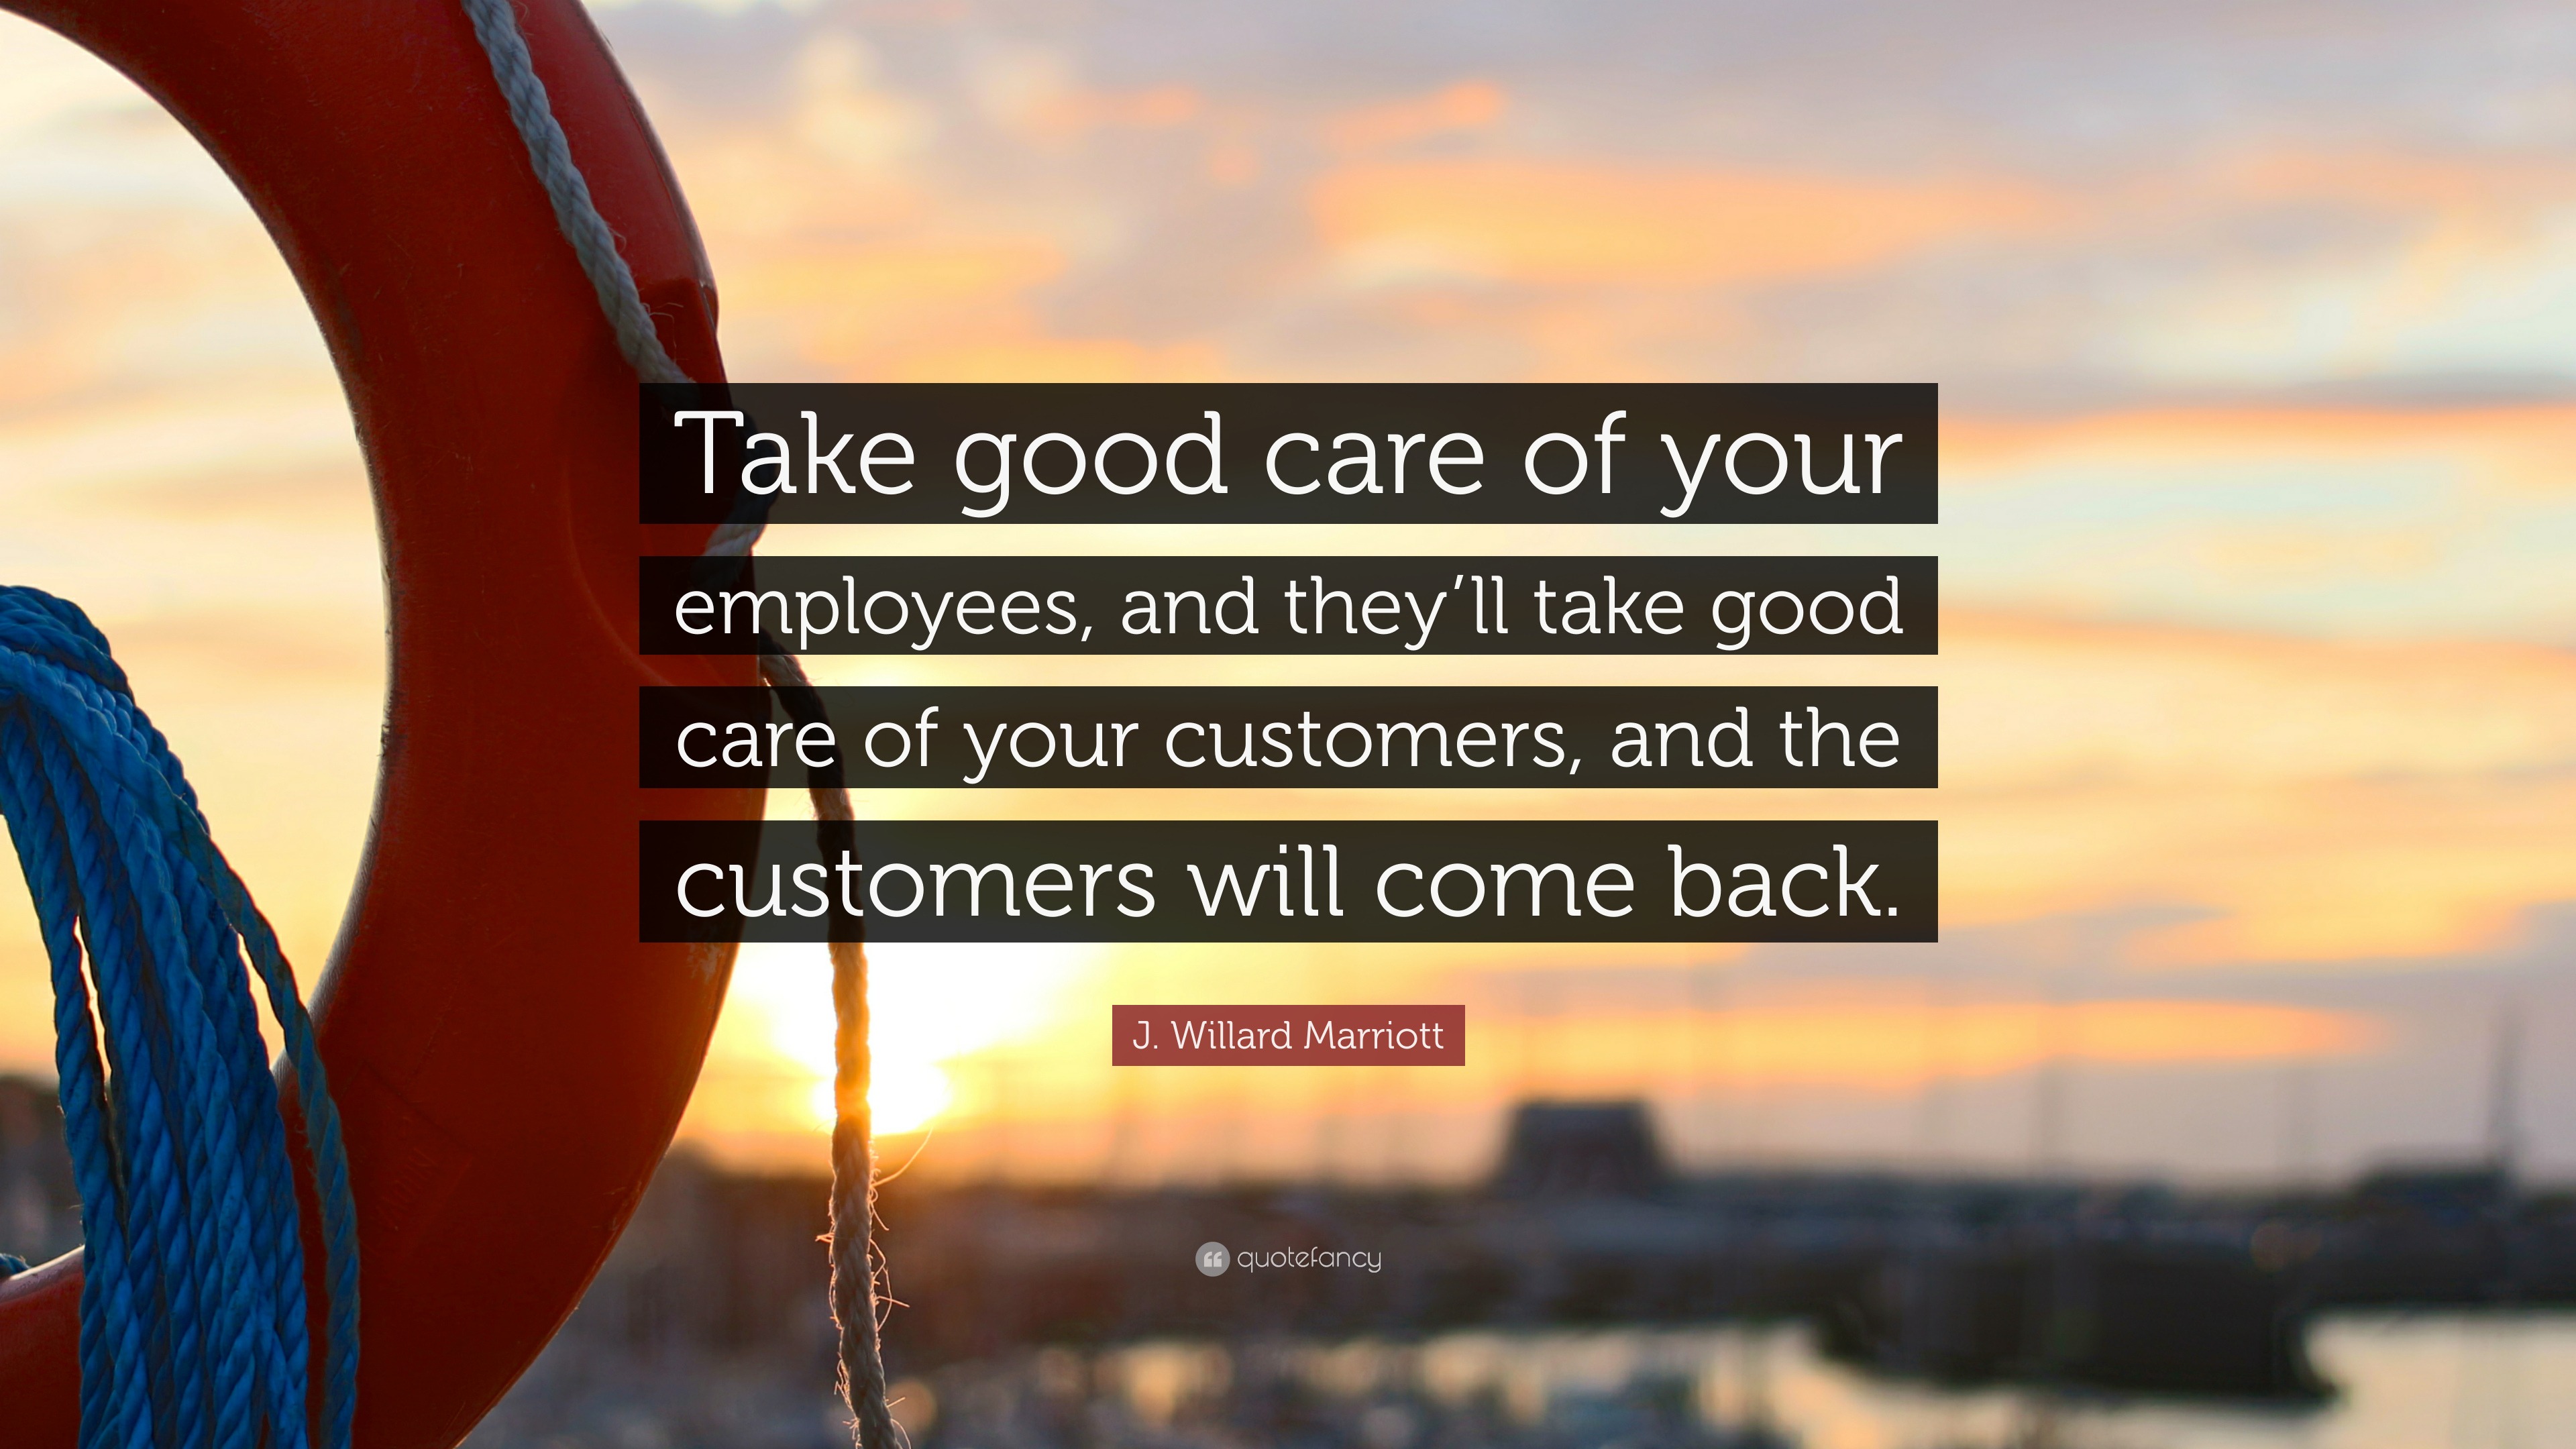 J. Willard Marriott Quote: “Take good care of your employees, and they